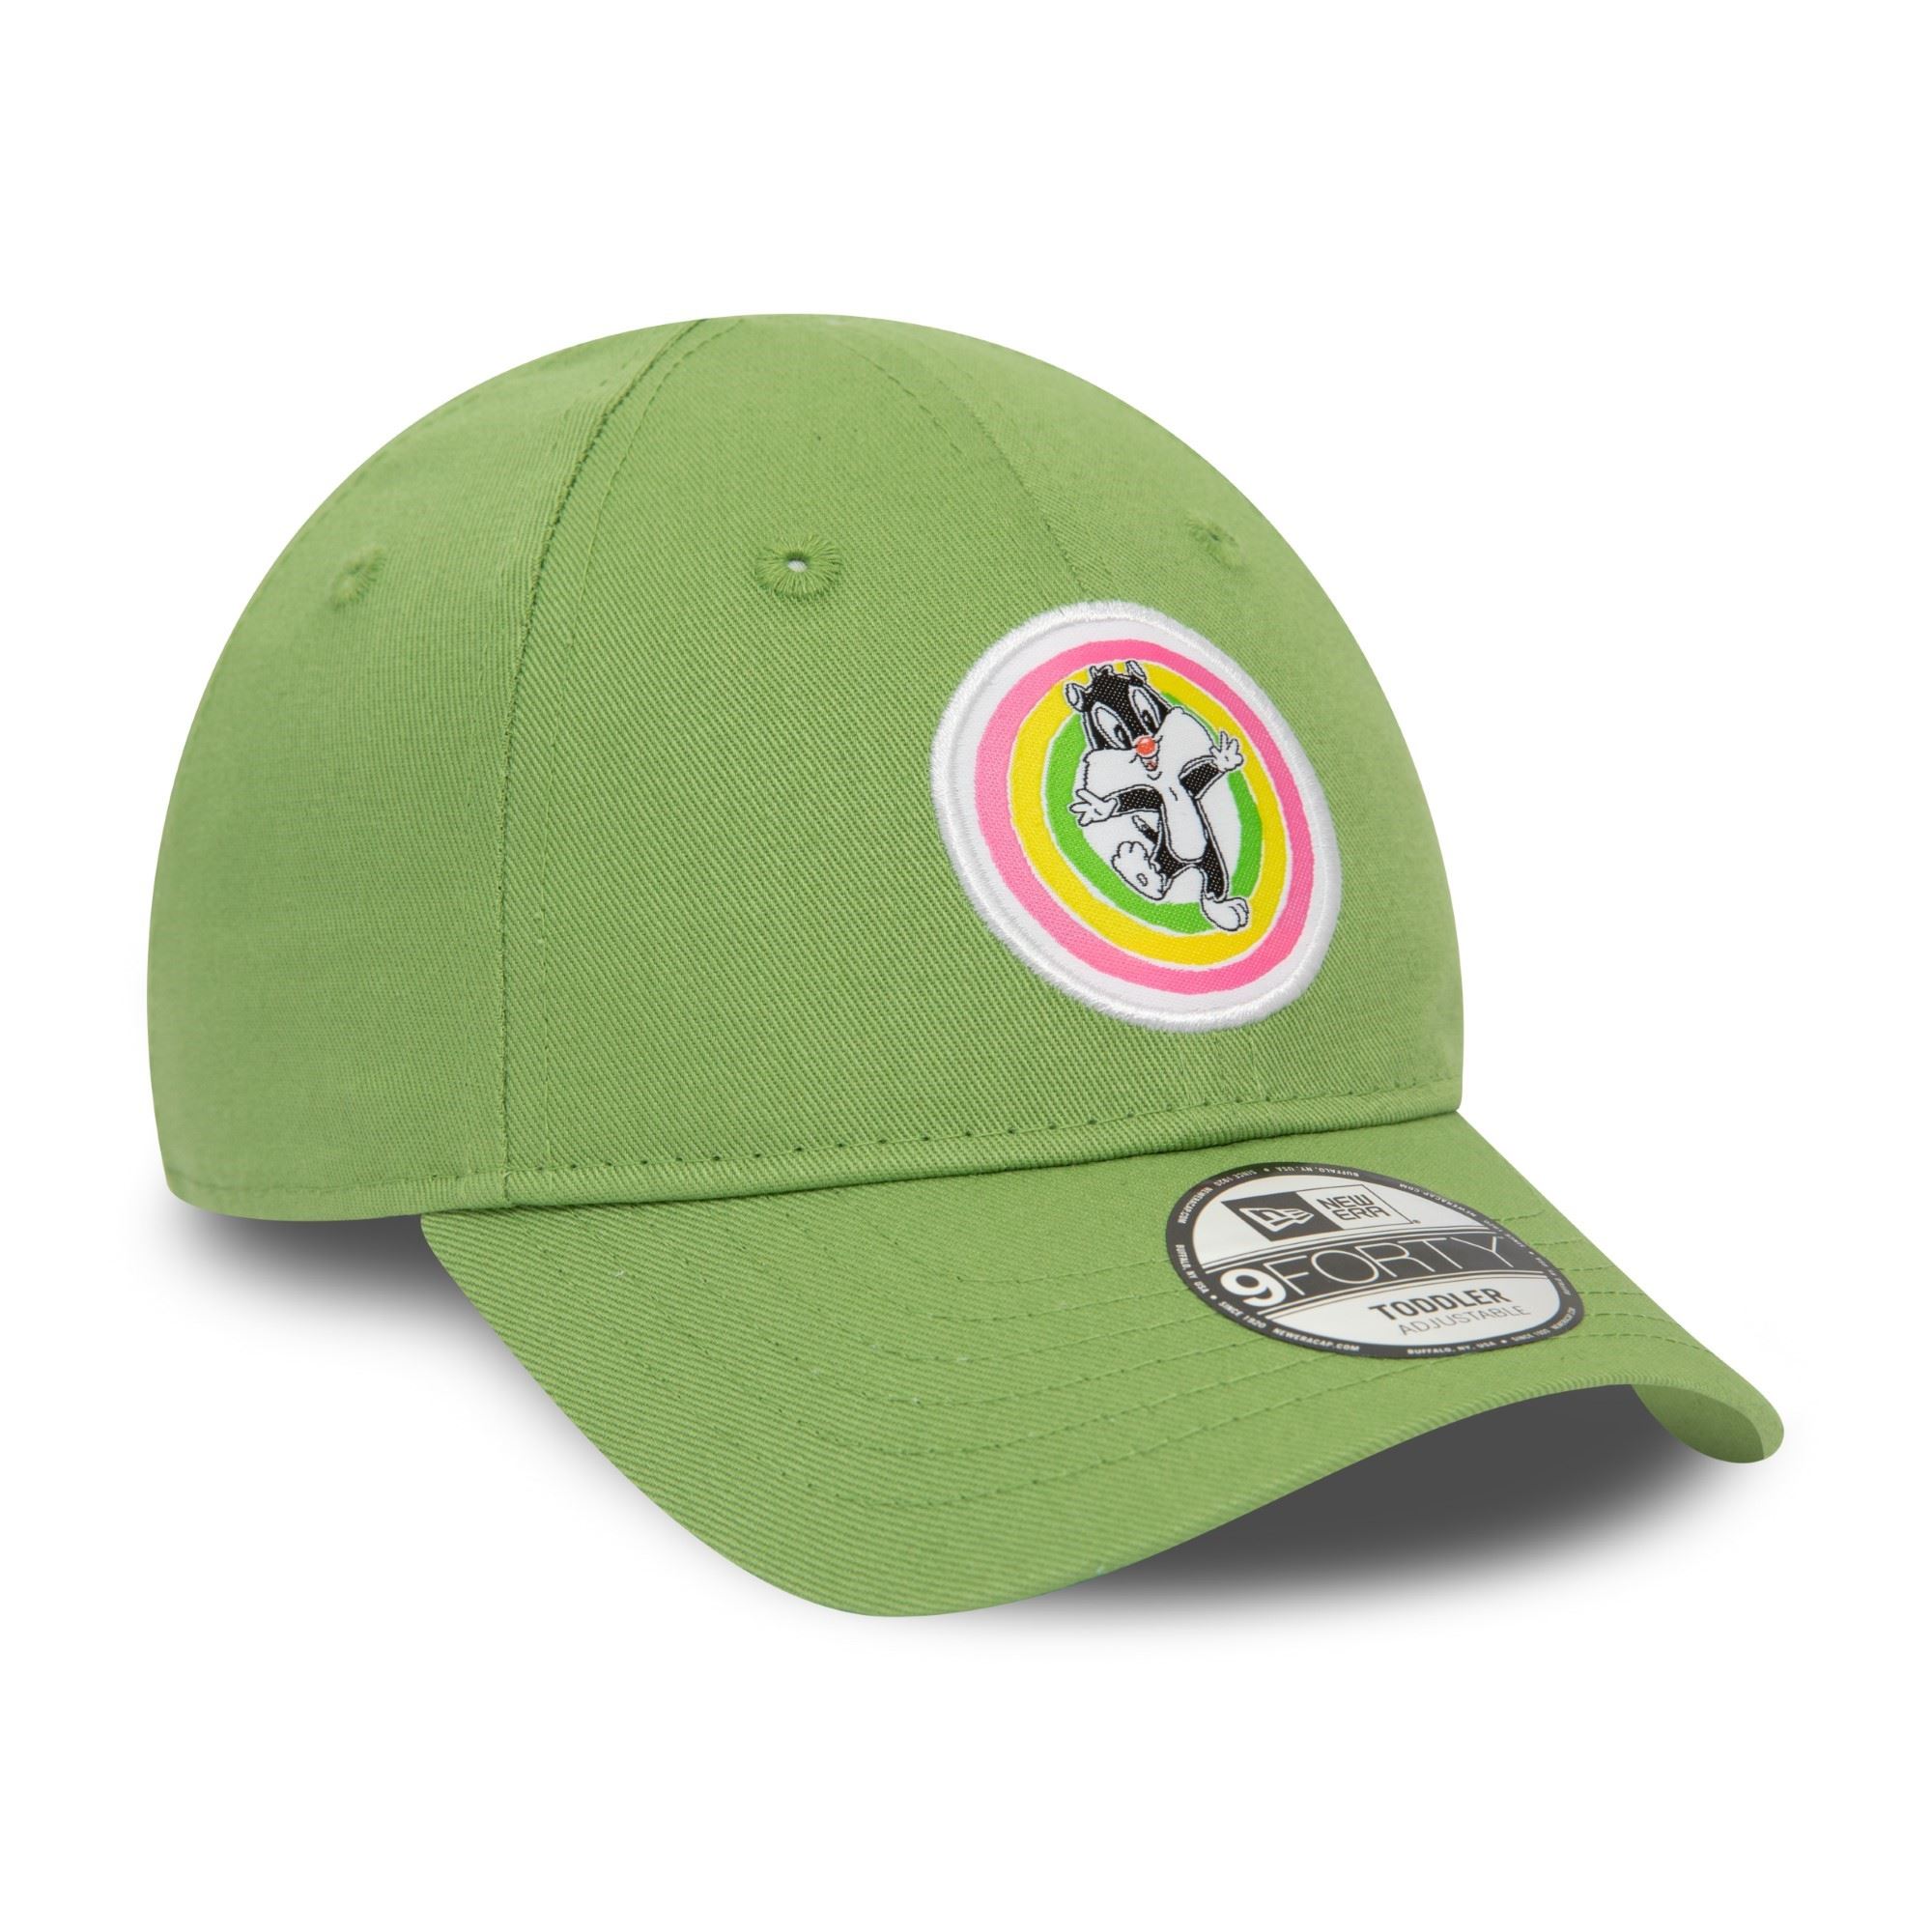 Sylvester Looney Tunes Pastel Green 9Forty Toddler Cap New Era